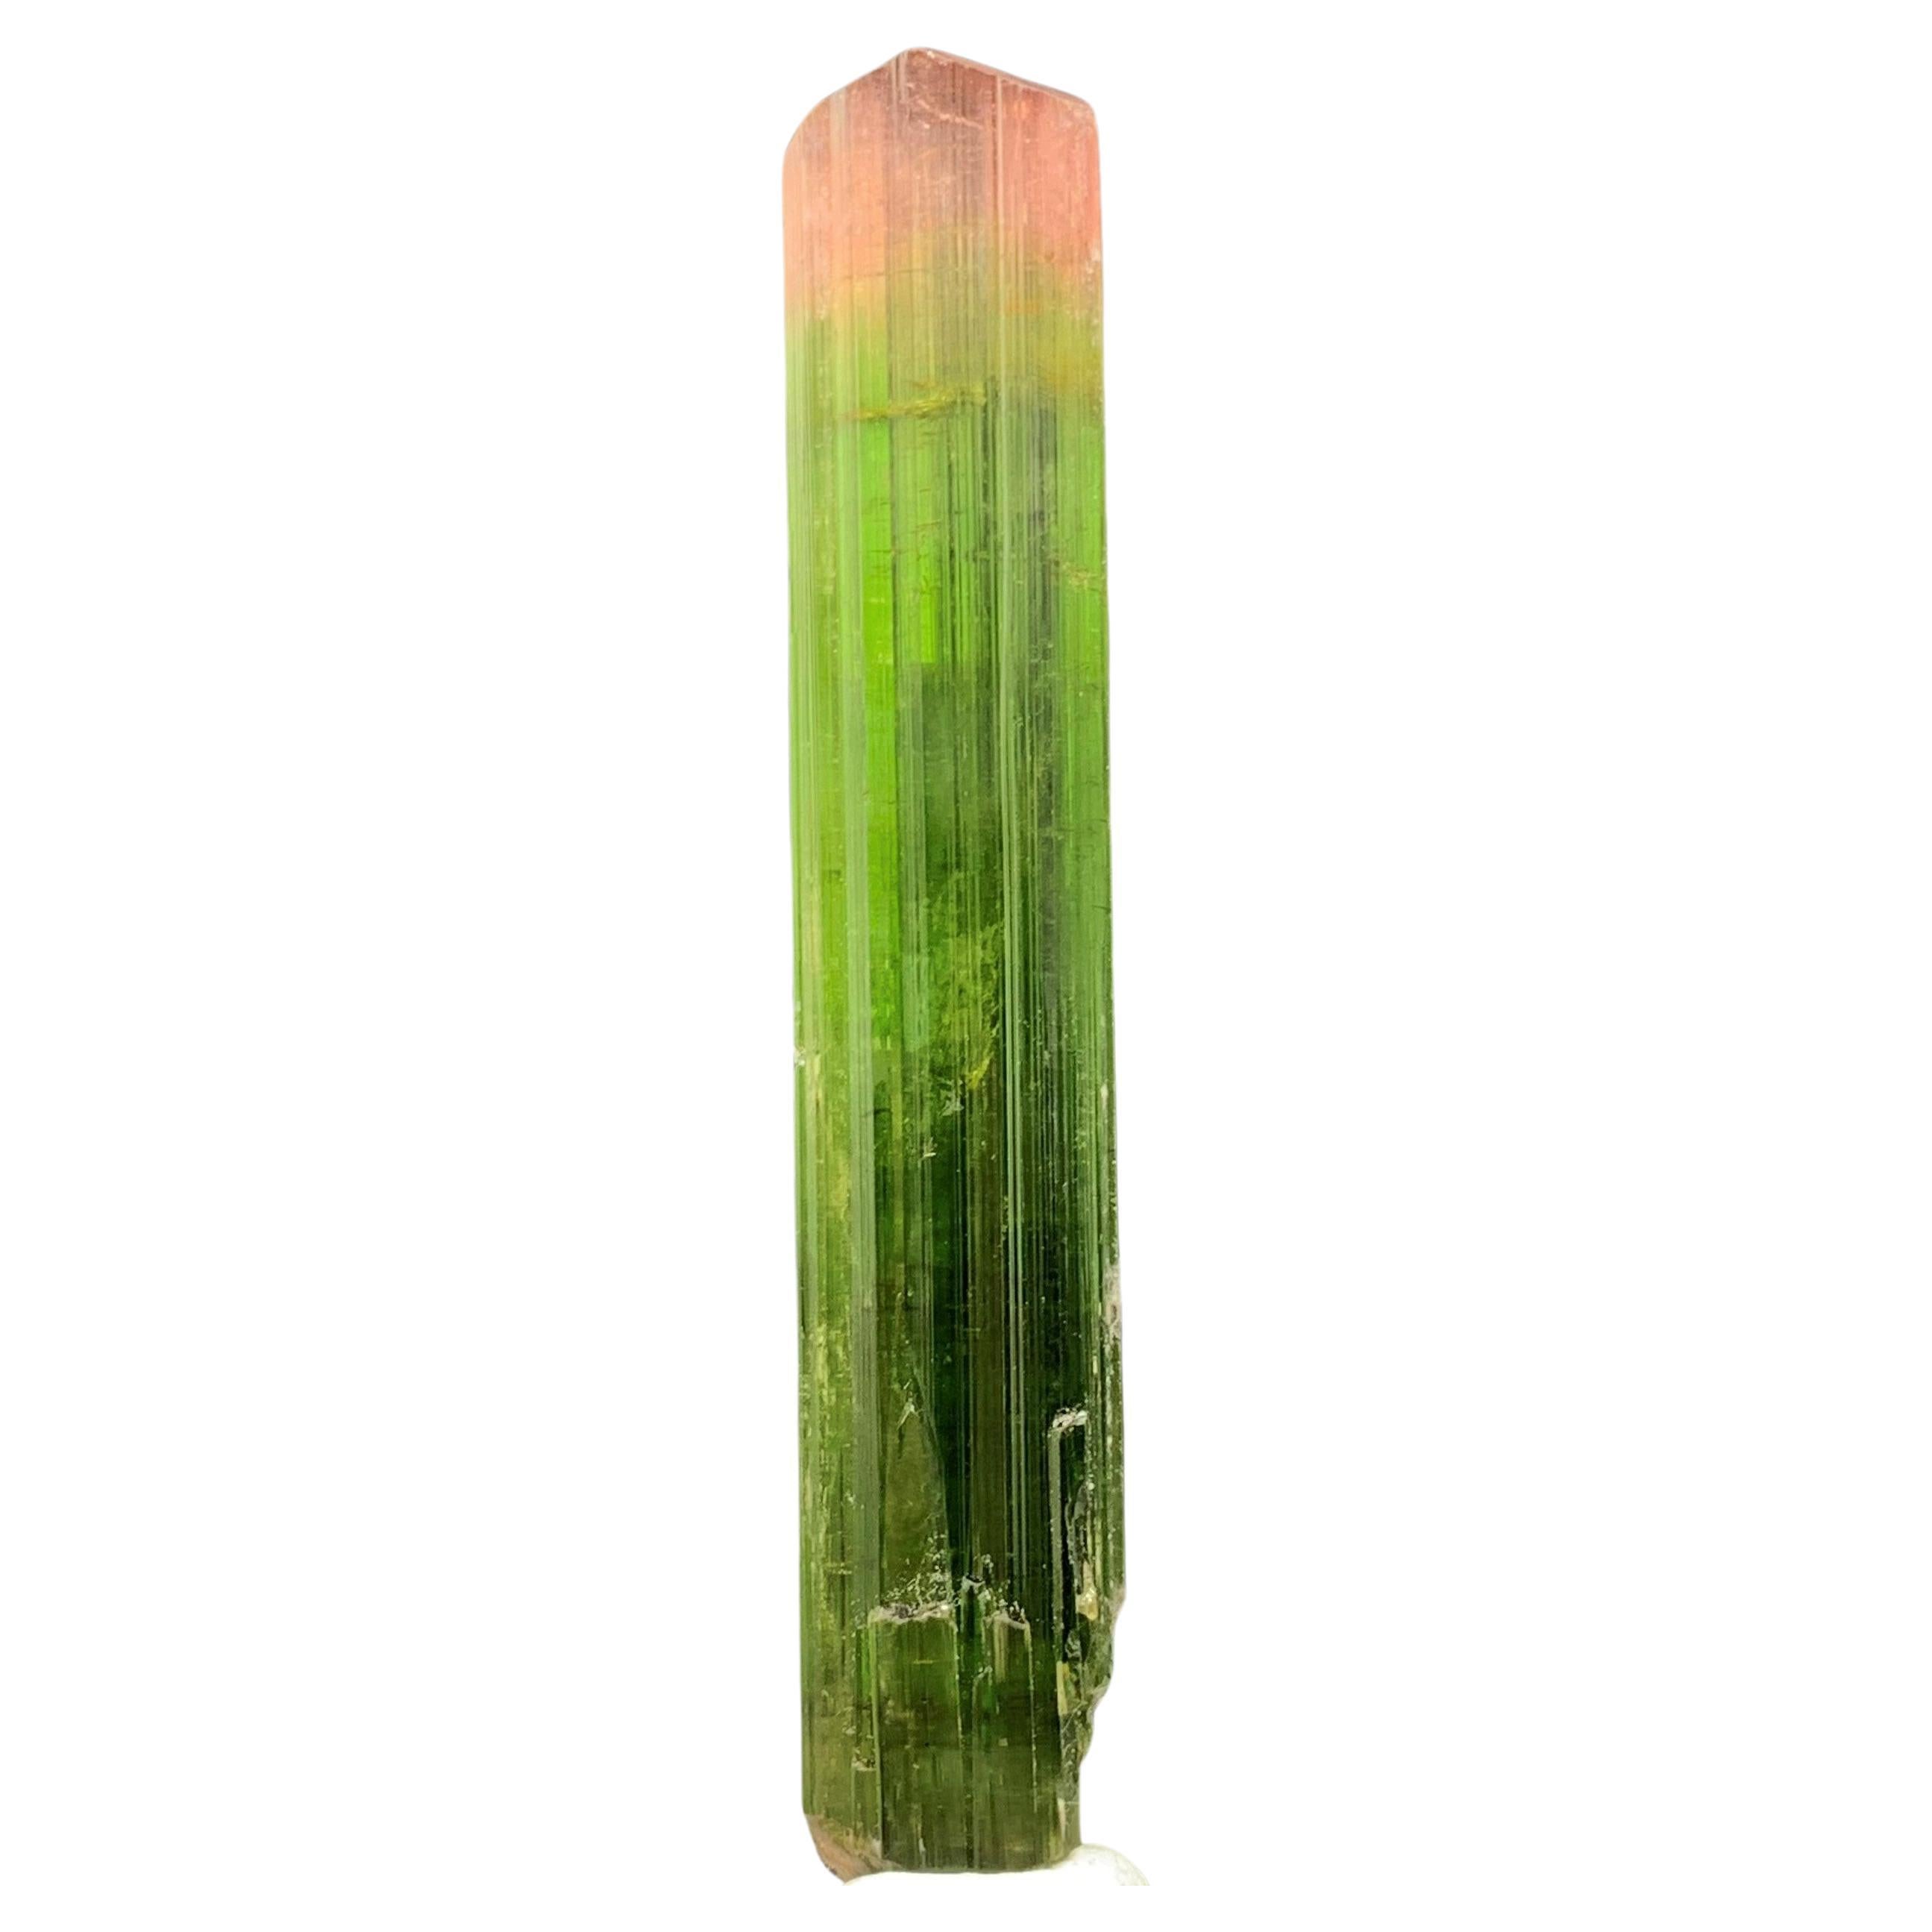 Gorgeous 53.65 Carat Bi Color Tourmaline Crystal From Paprok Mine Afghanistan For Sale